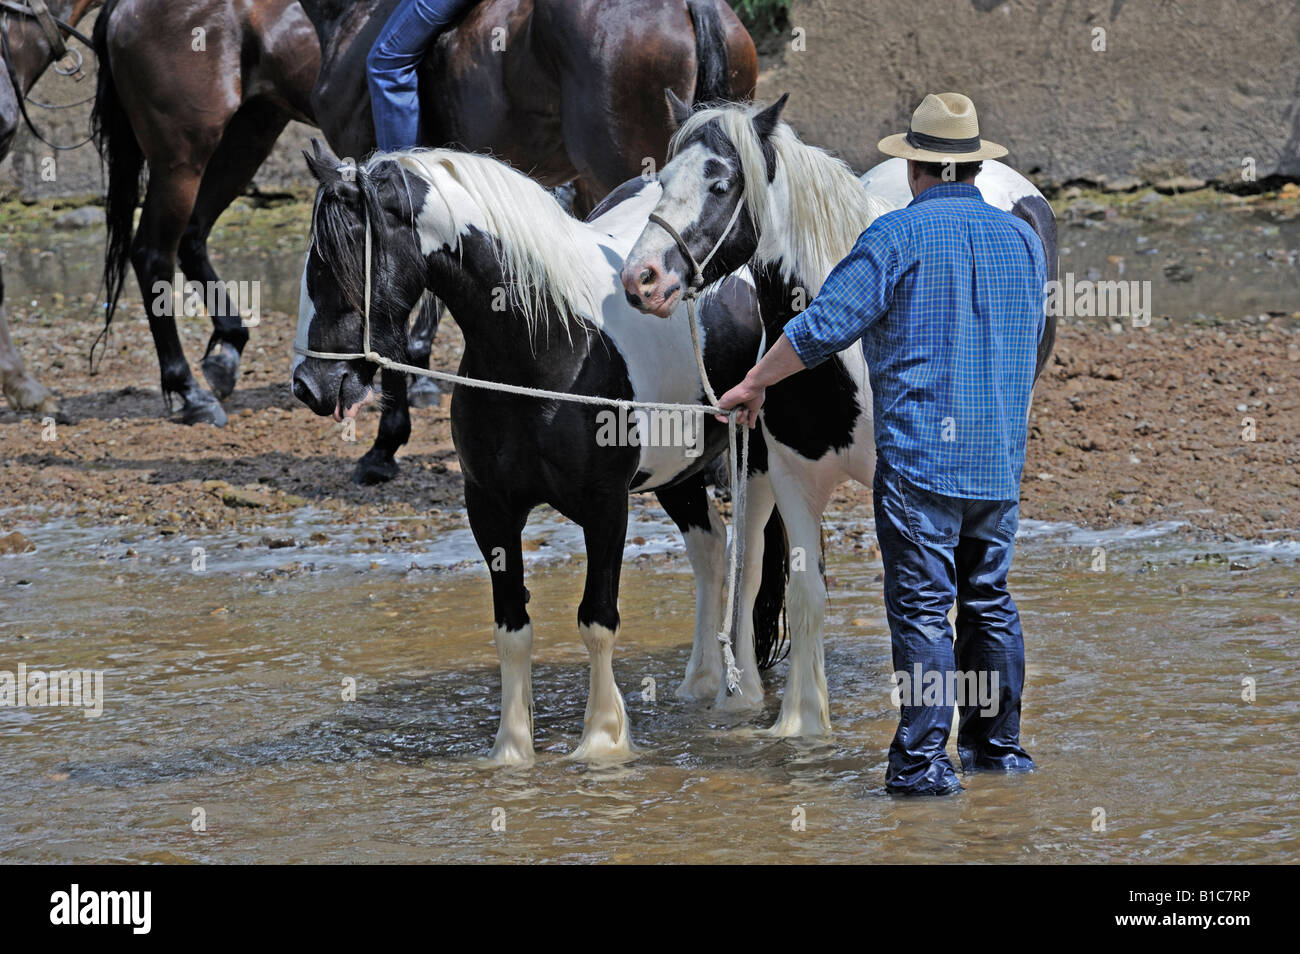 Gypsy traveller with horses in River Eden. Appleby Horse Fair. Appleby-in-Westmorland, Cumbria, England, United Kingdom, Europe. Stock Photo